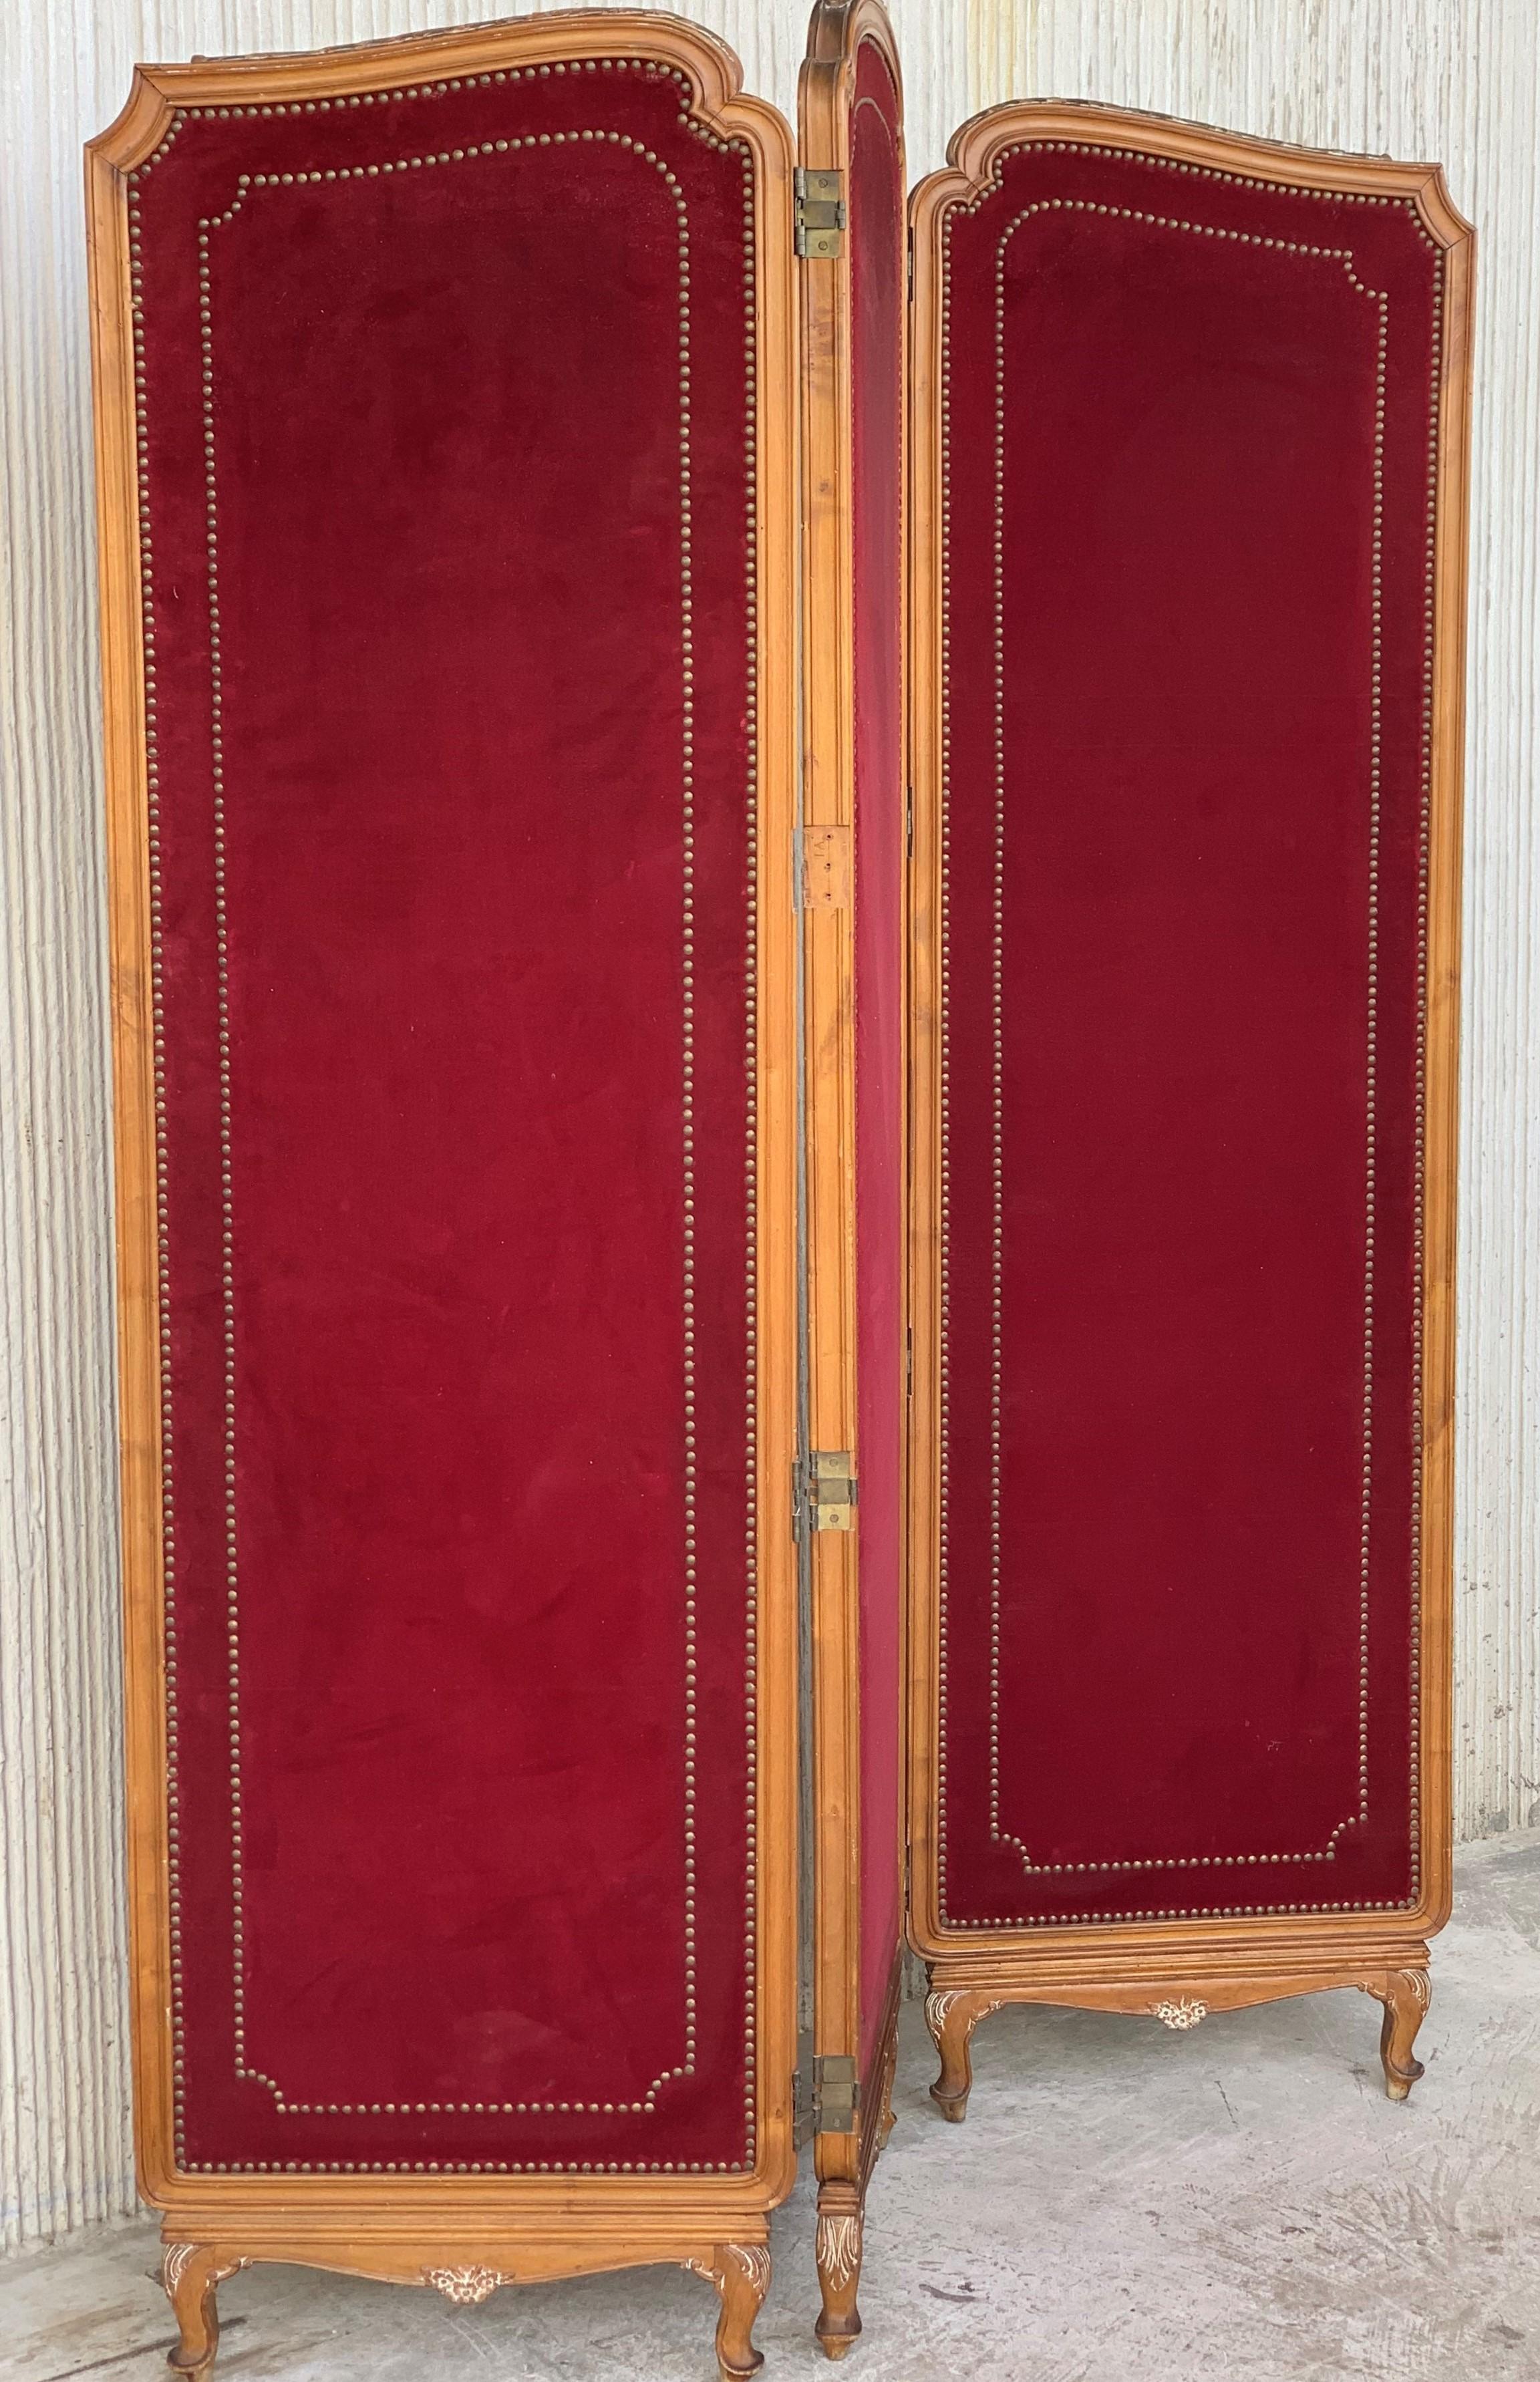 French red velvet three-panel screen adorned with antique brass tacks.
Beautiful carved legs and tops.